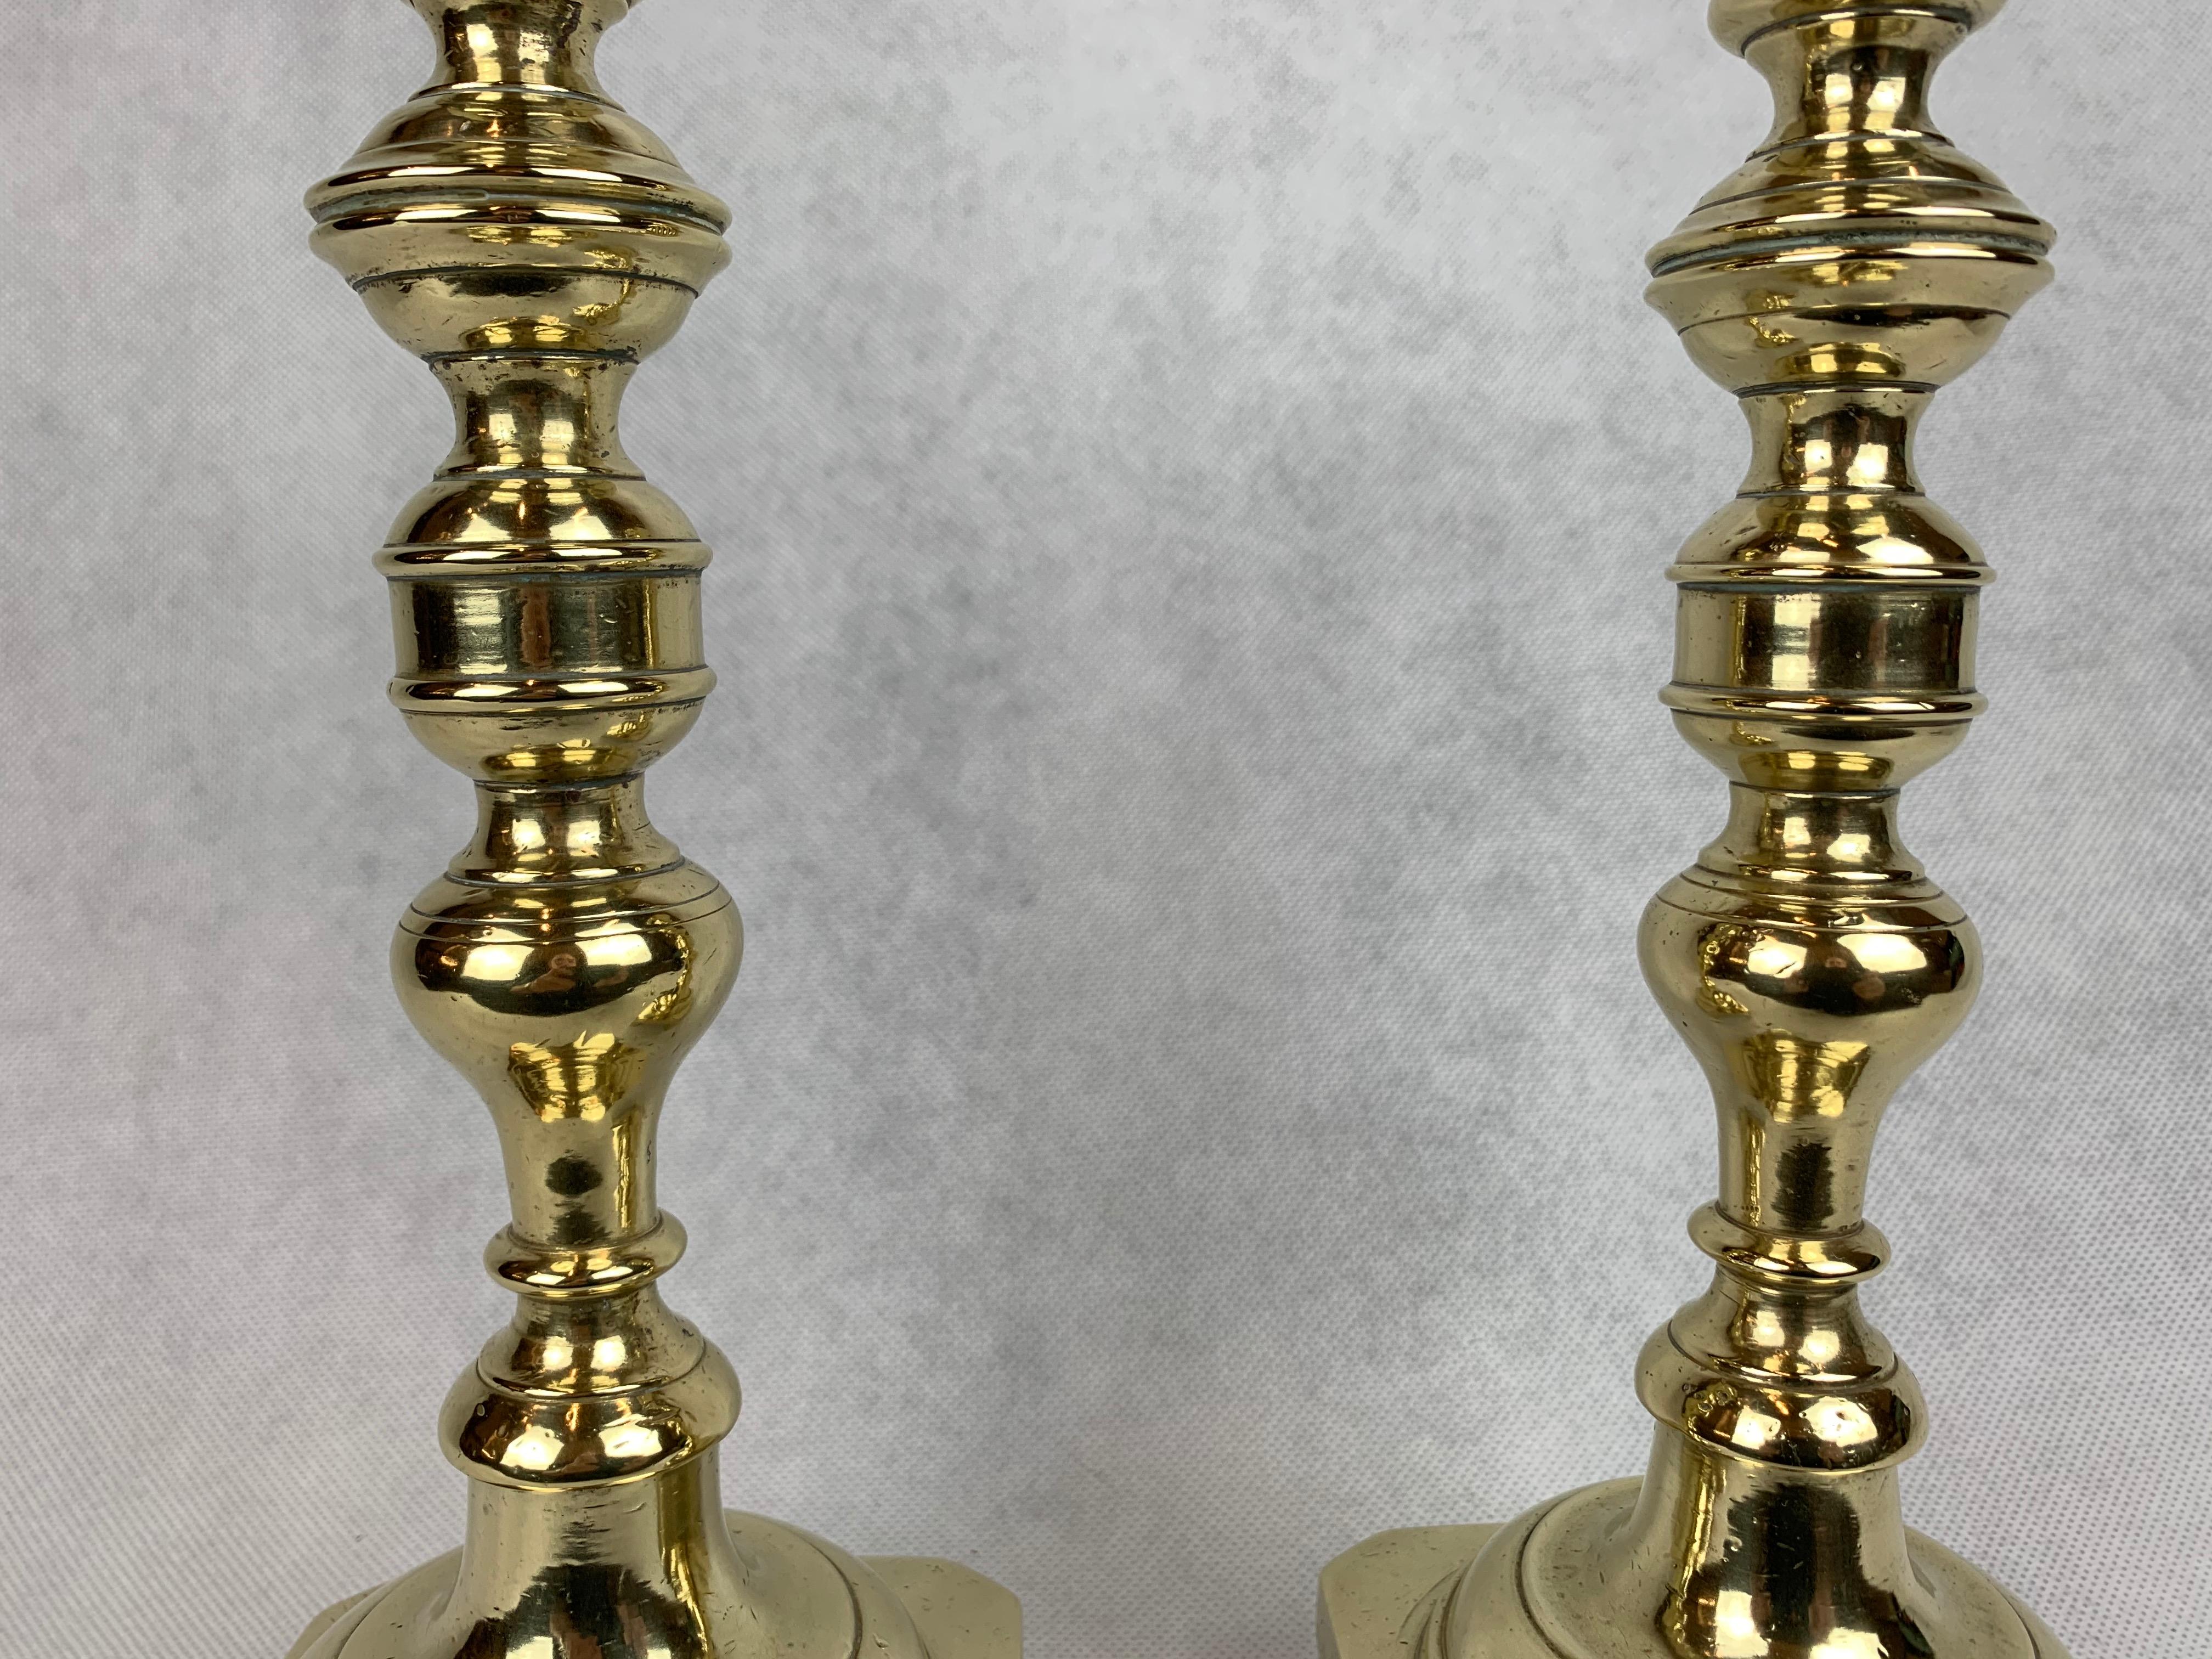 Exceptional fine pair of solid brass Russian candlesticks. The candleholder is in a flared vase form, while the base is banded, square and footed. If you turn the candlesticks around you can see the massive turned screws for disassembly and